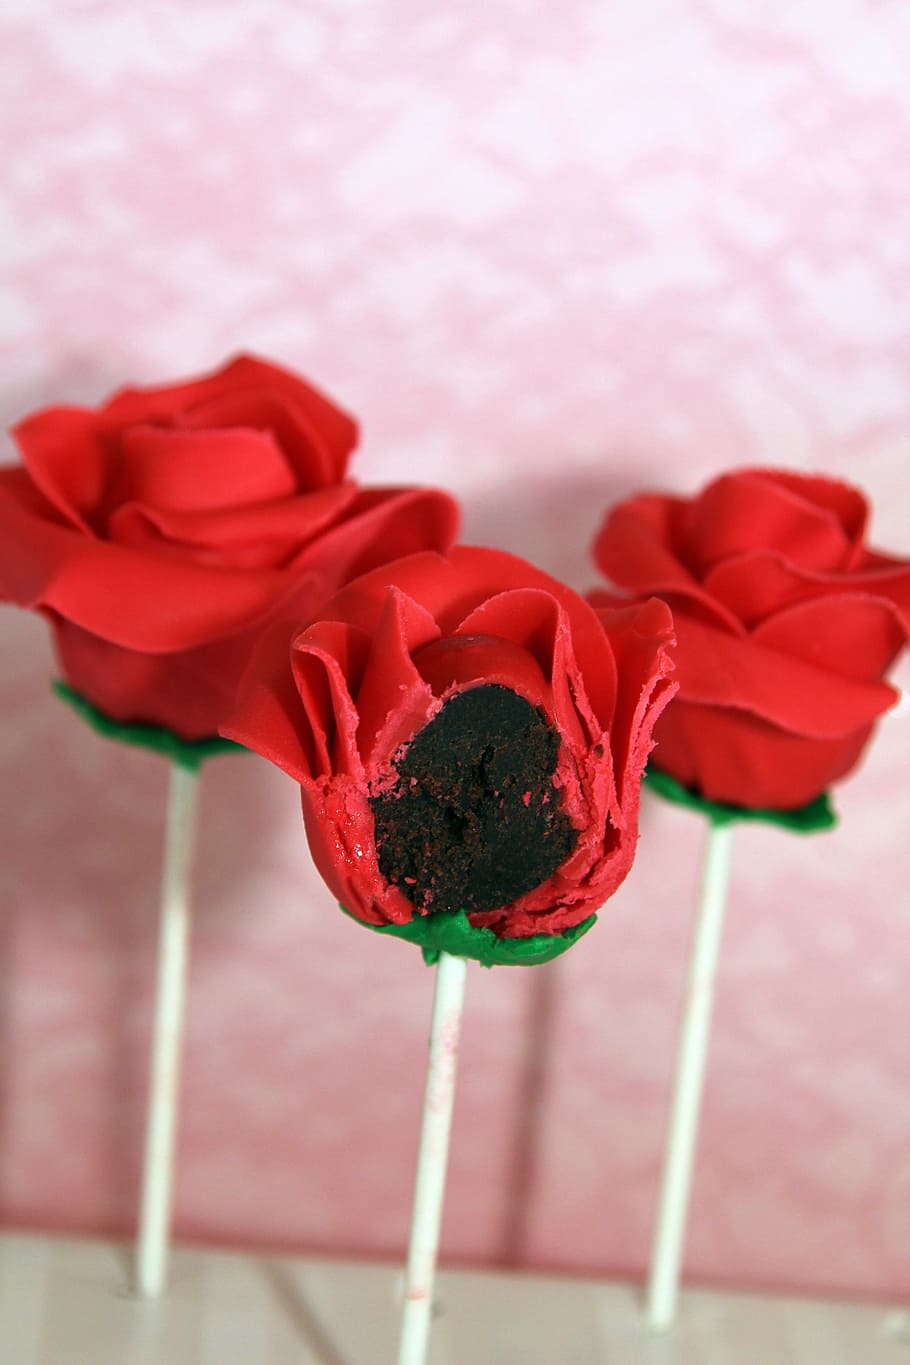 cake pops, frosted, dessert, roses, red, chocolate, gourmet, flower, sweet, decoration